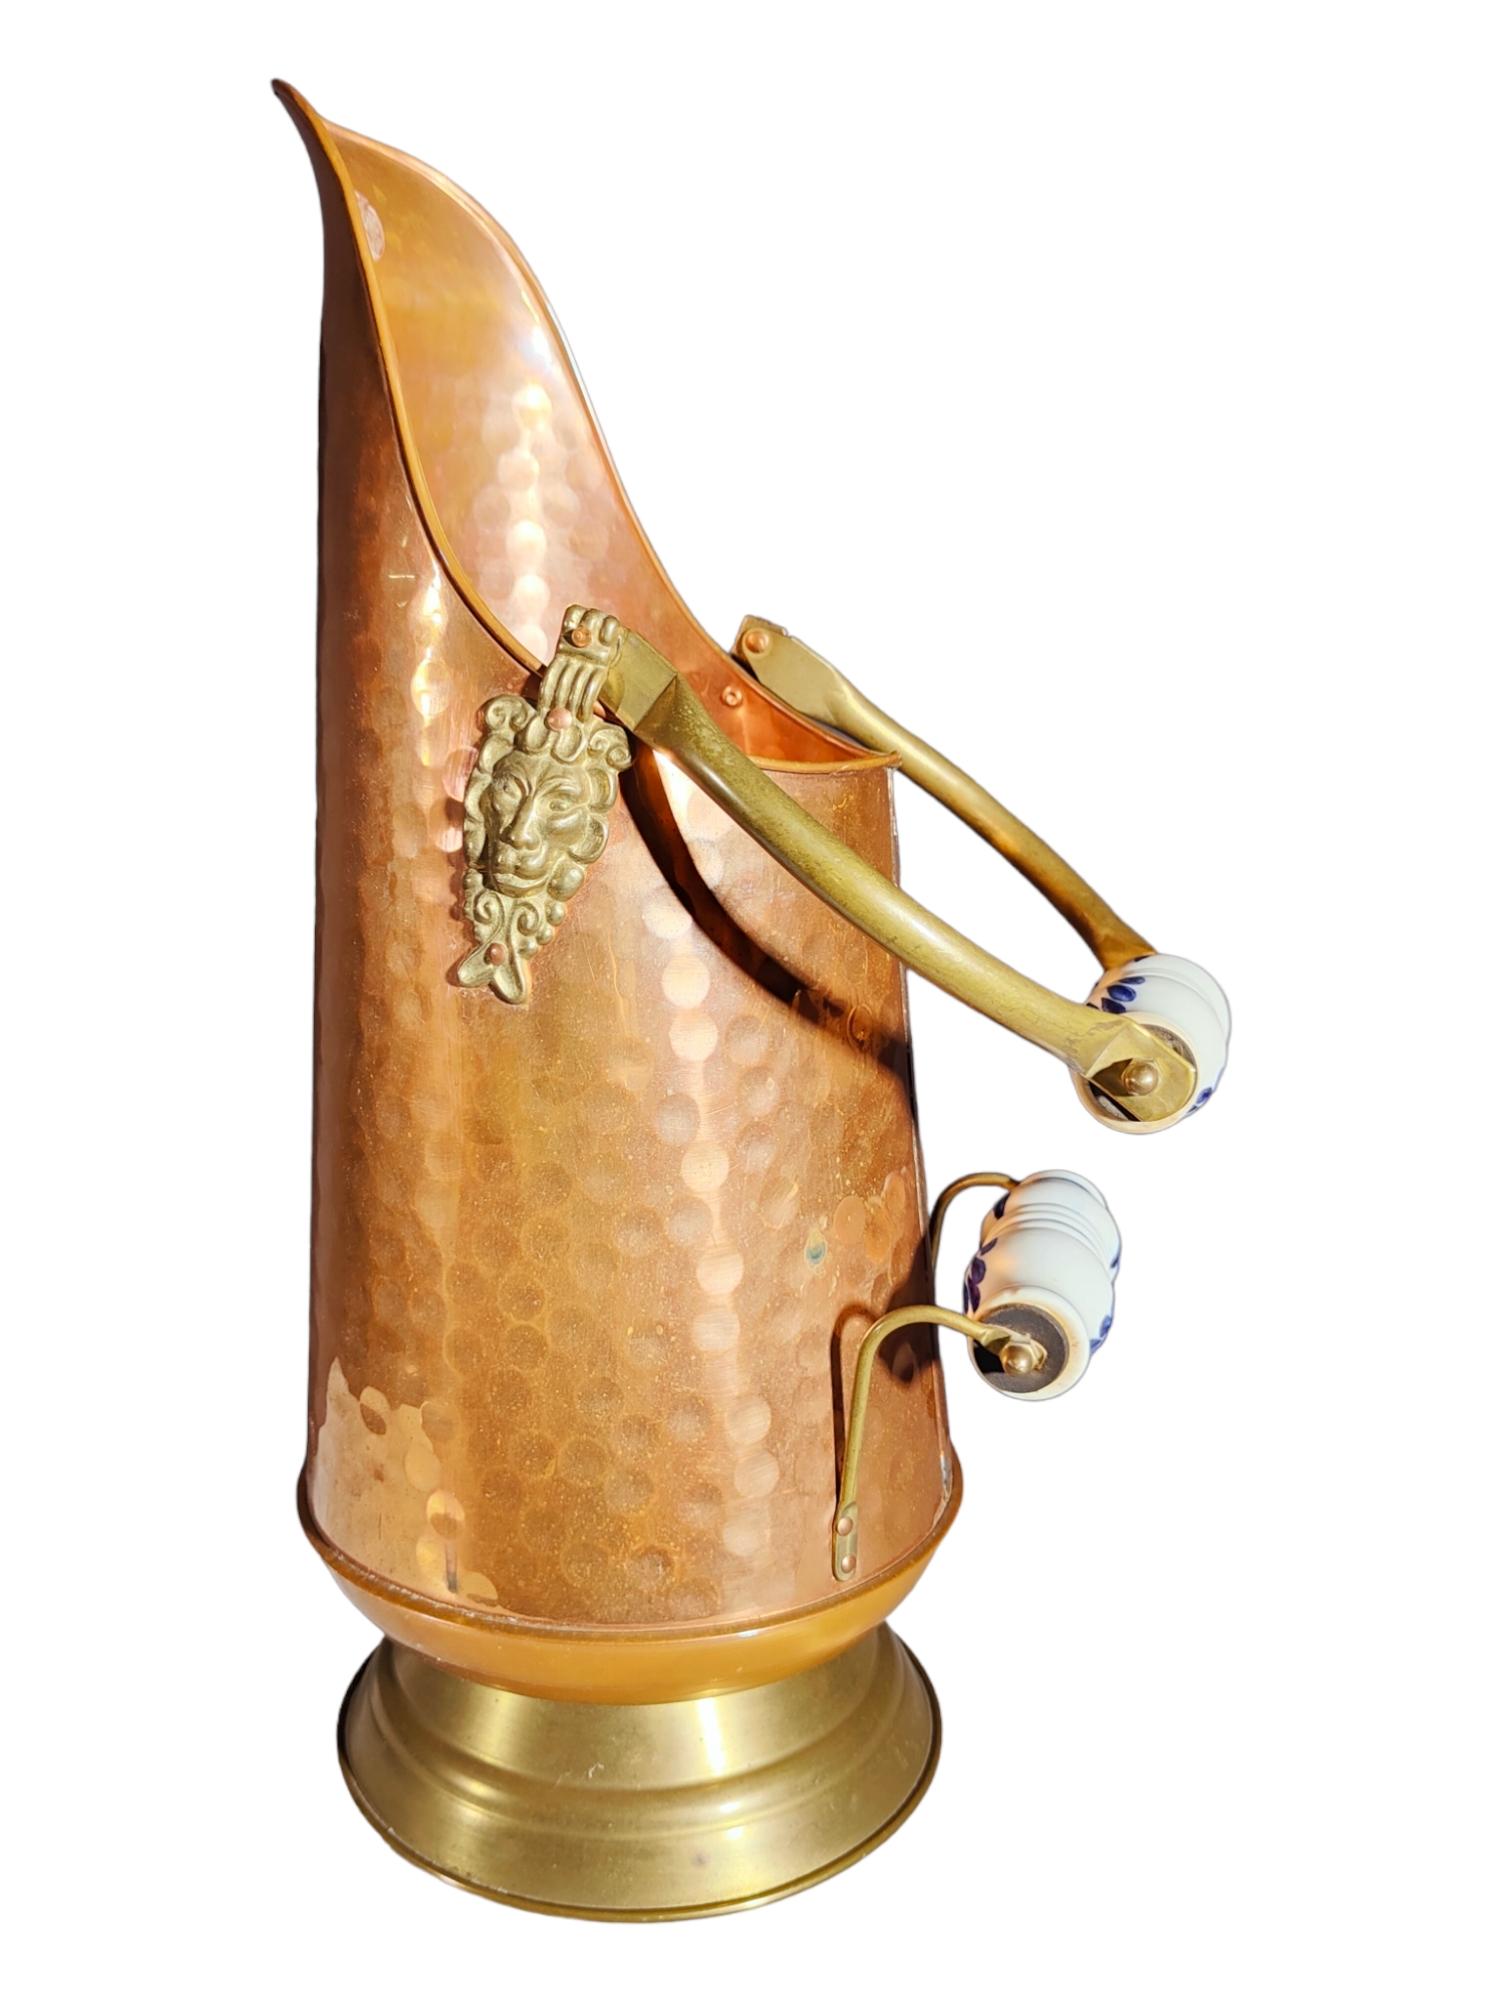 Mid-20th Century Umbrella Stand
DECORATIVE UMBRELLA HOLDER IN HAMMERED COPPER AND CERAMIC HANDLE FROM THE 1950s. IN PERFECT CONDITION. MEASUREMENTS: 50 CM IN HEIGHT AND 27 CM IN DIAMETER